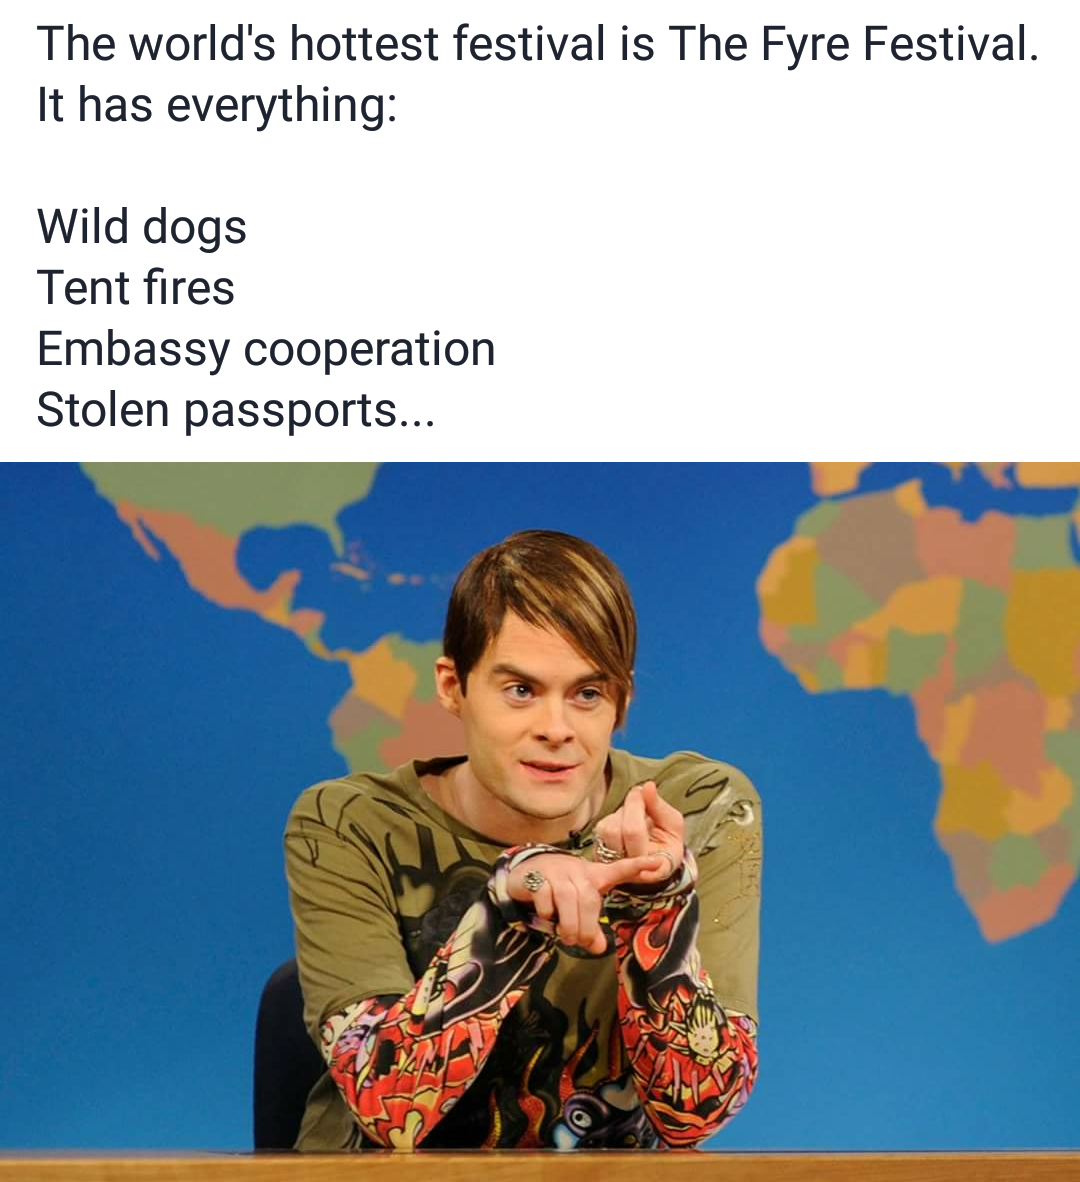 bill hader snl stefon - The world's hottest festival is The Fyre Festival. It has everything Wild dogs Tent fires Embassy cooperation Stolen passports...